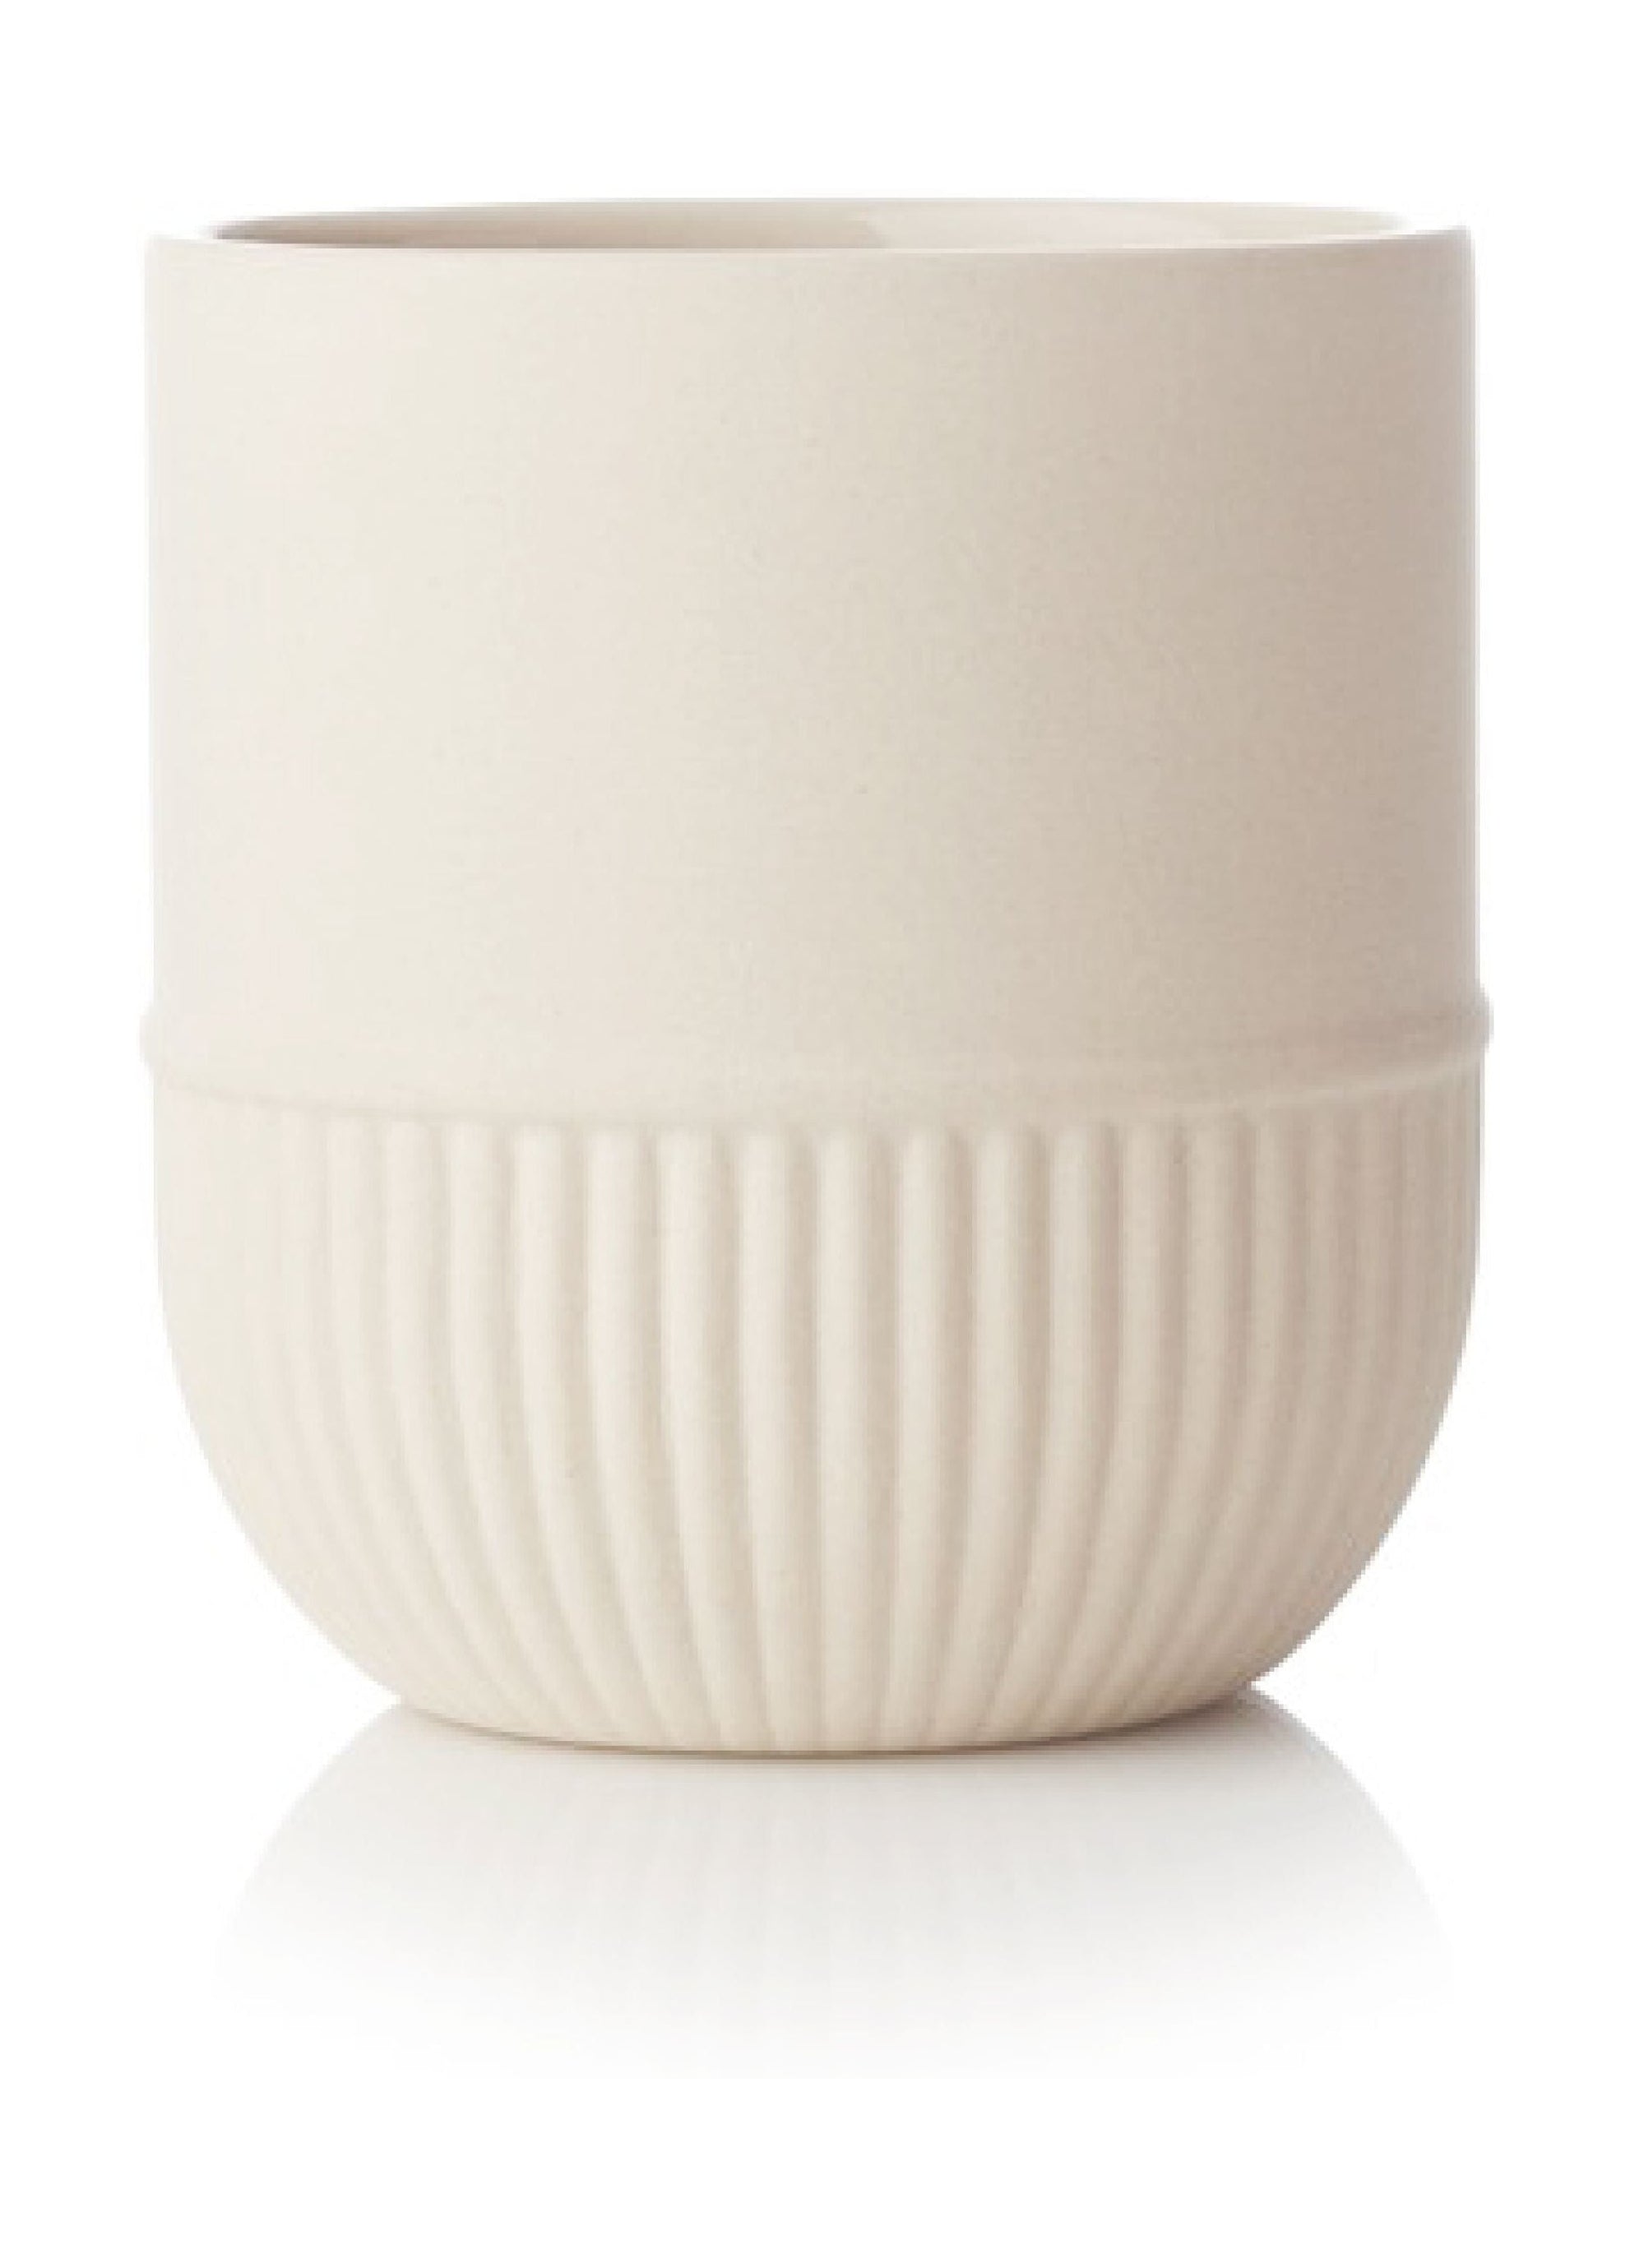 Malling Living Root Cup  Stor, Creme hvid